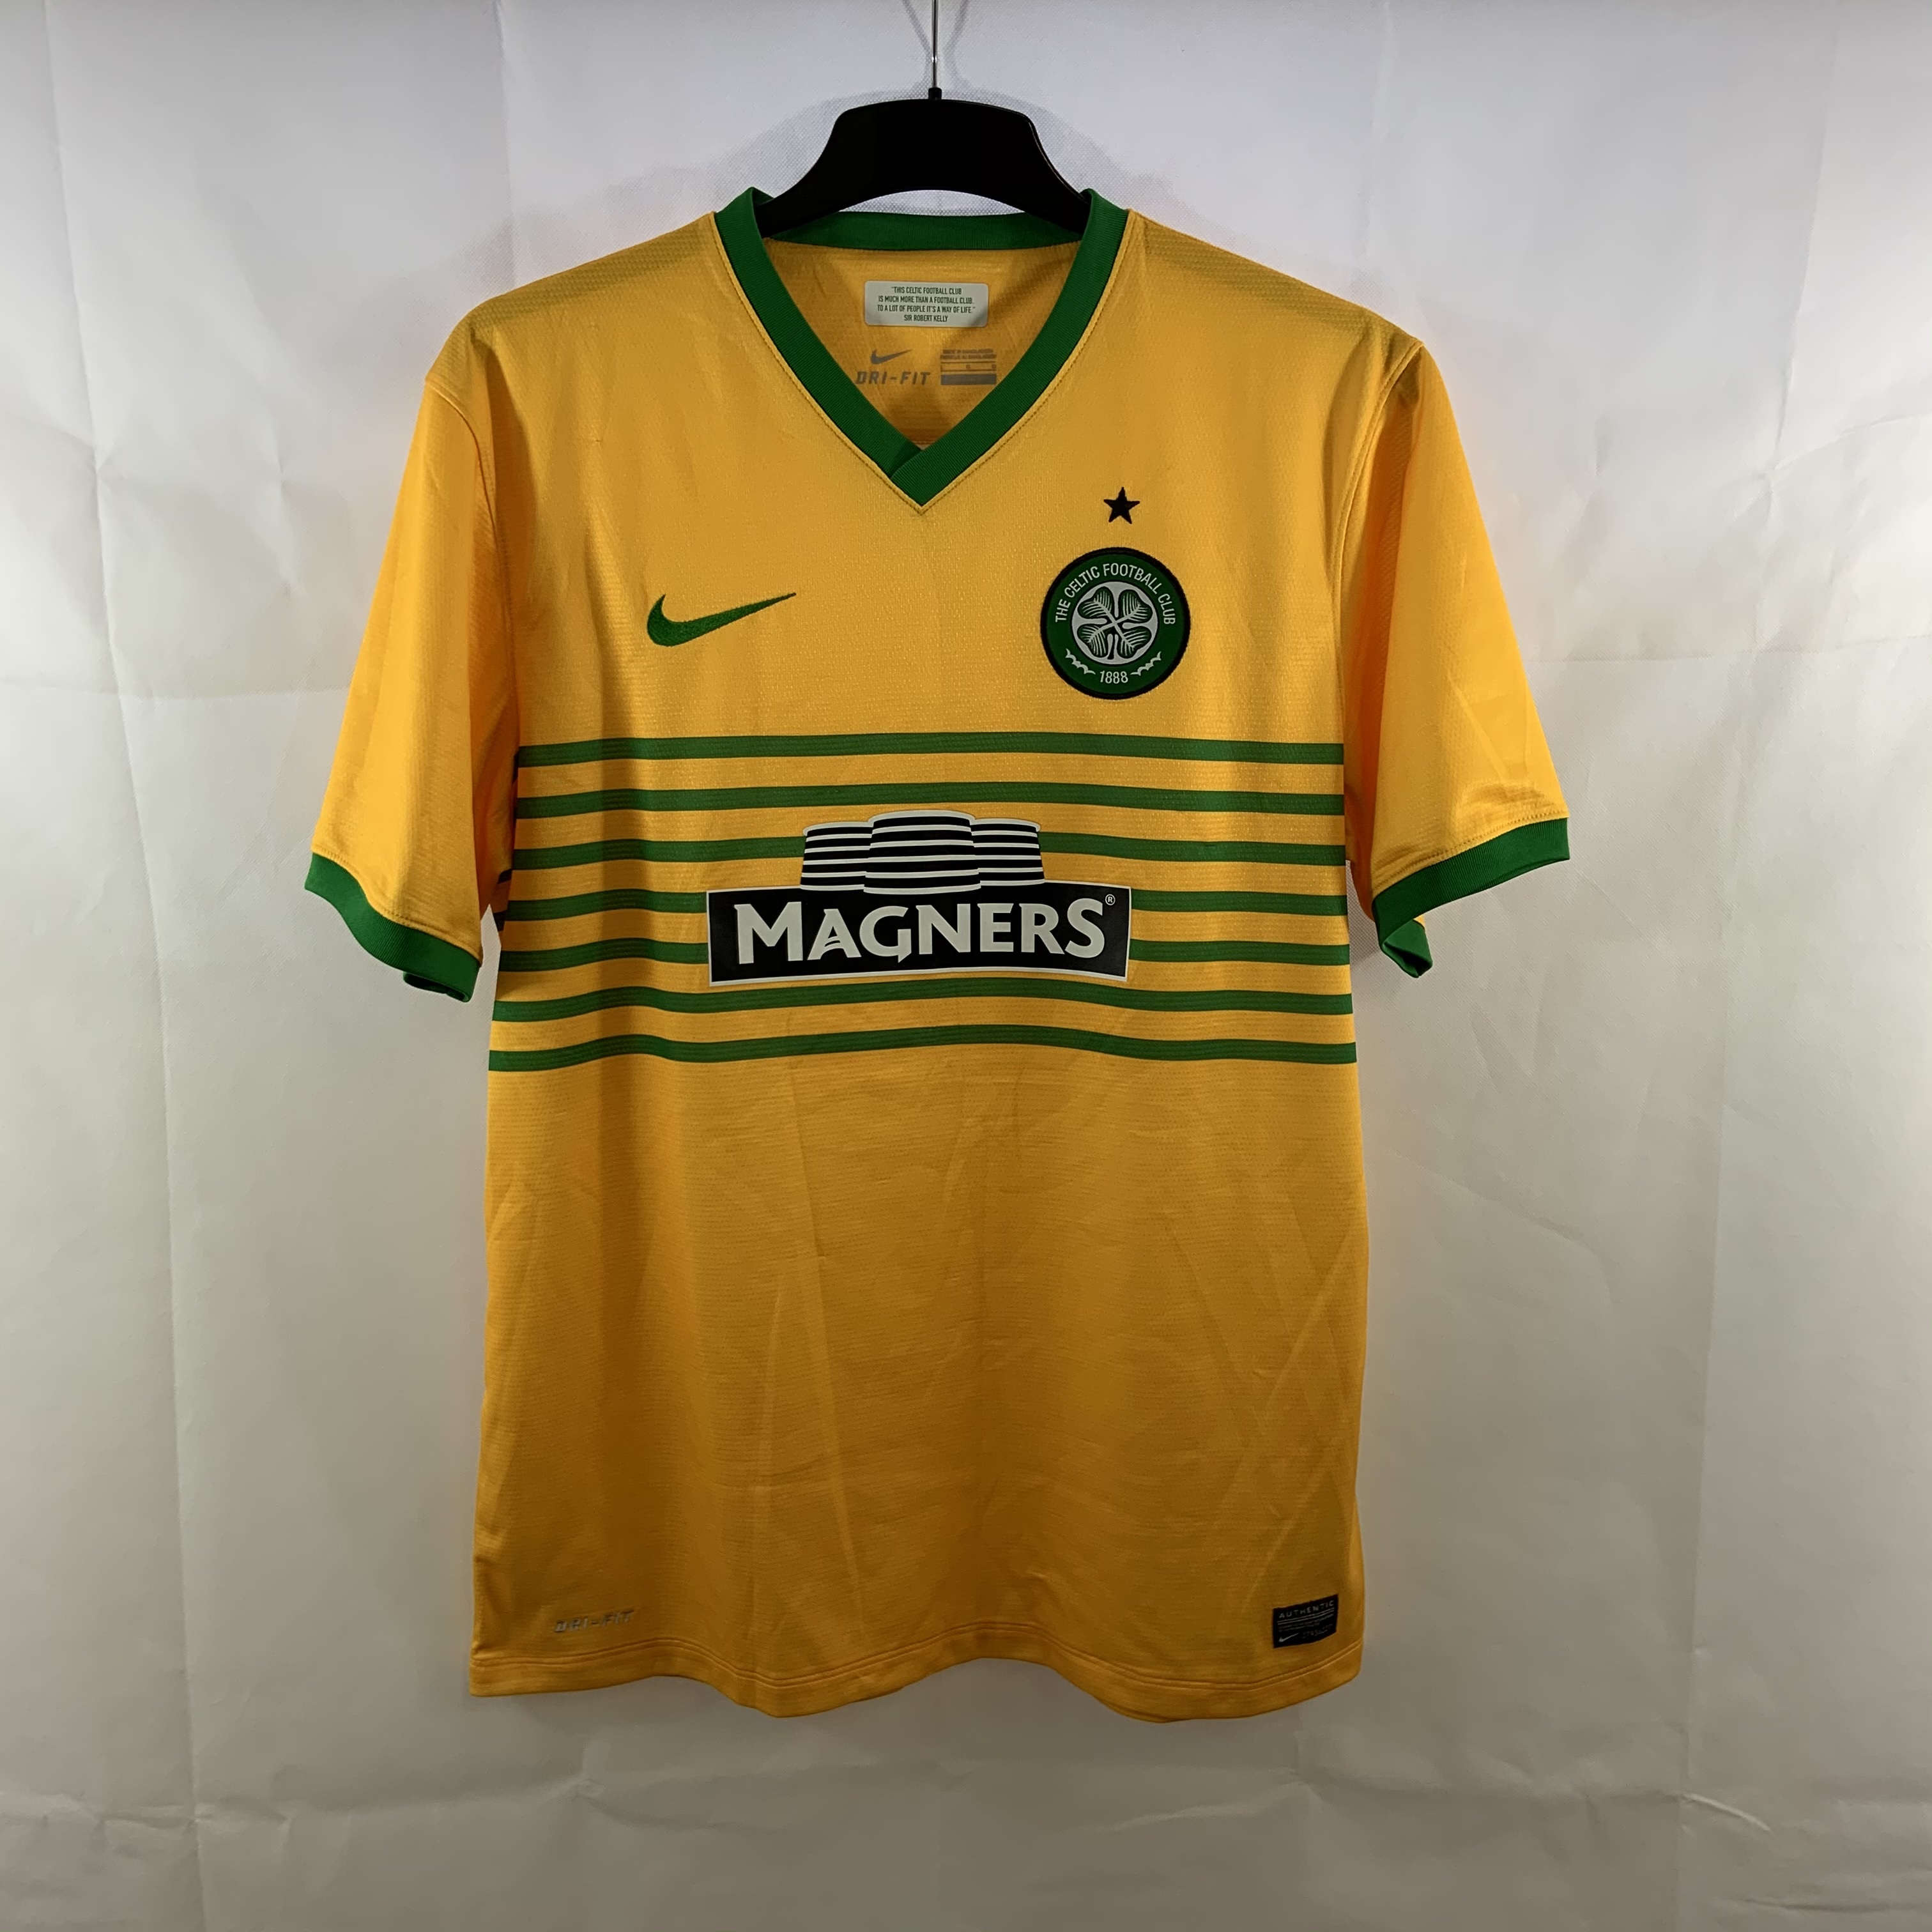 Away Top 2013-14 – The Celtic Wiki